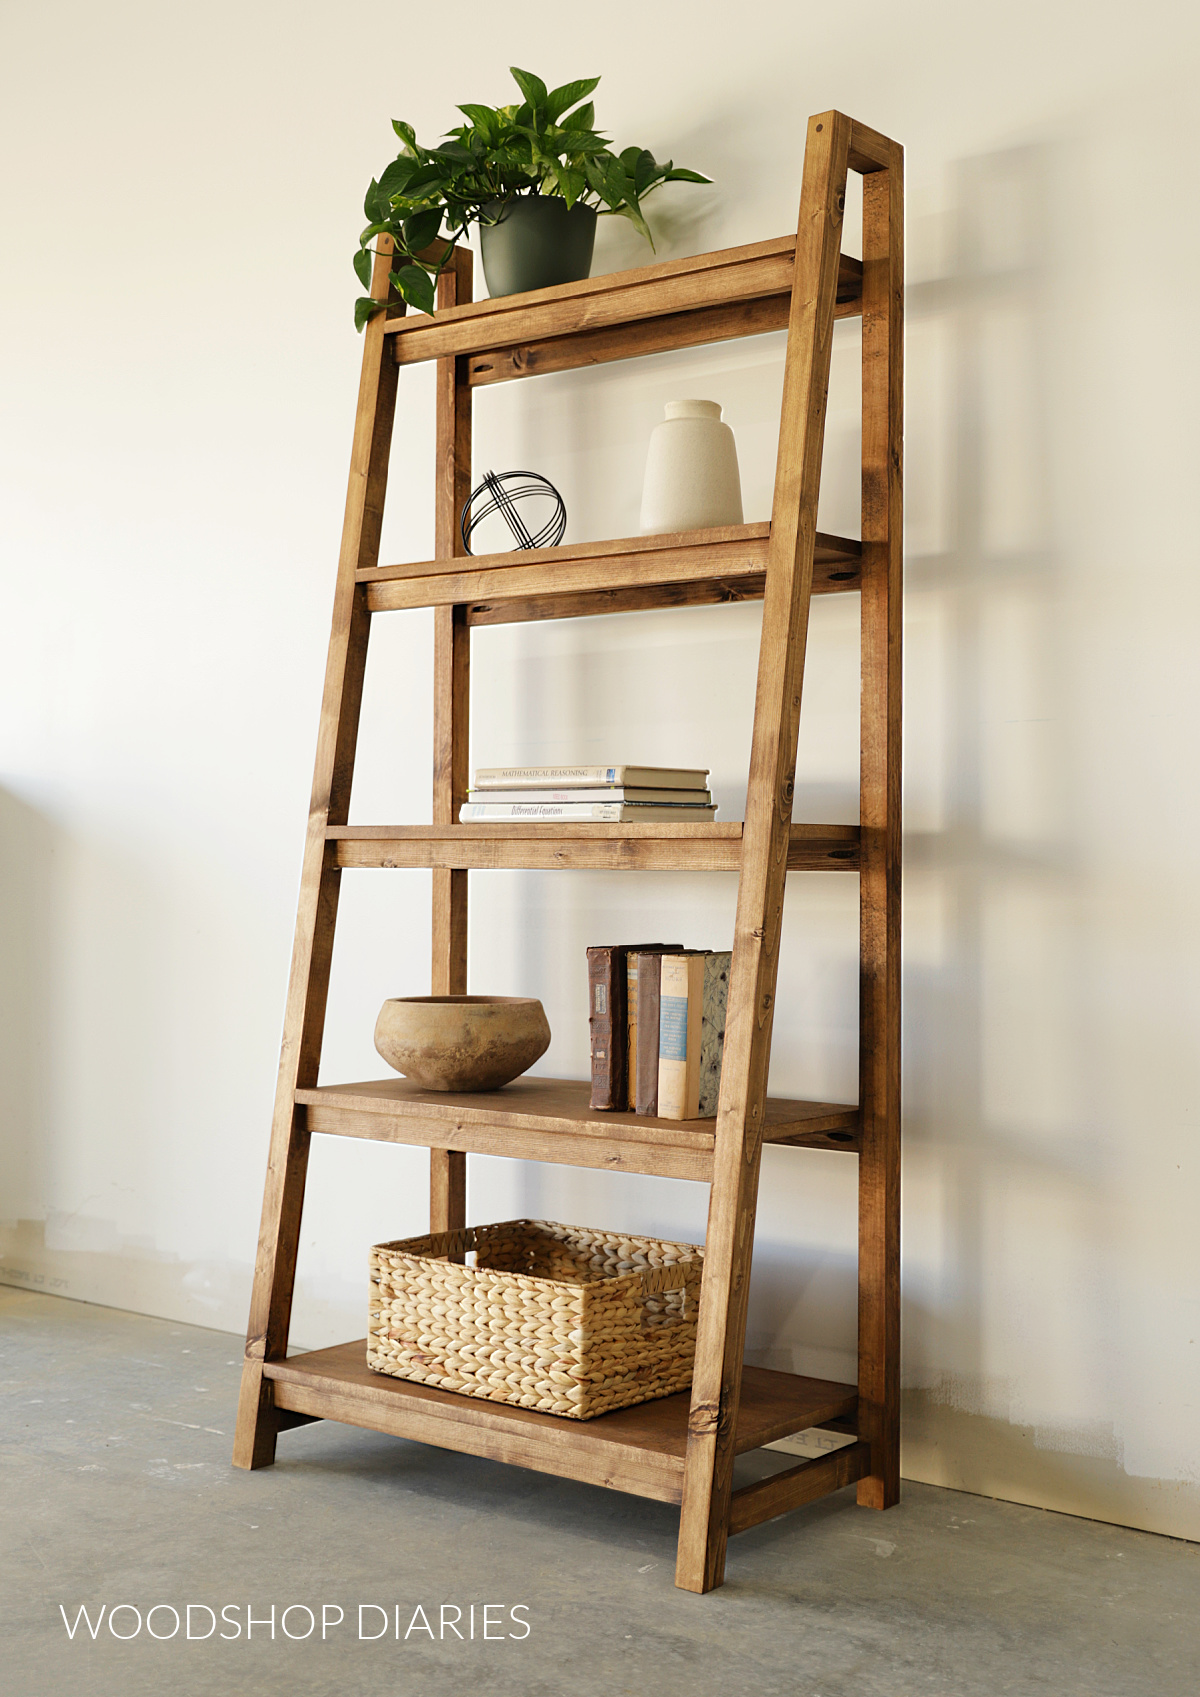 Completed 5 tier wooden DIY ladder bookshelf with decor on each tier